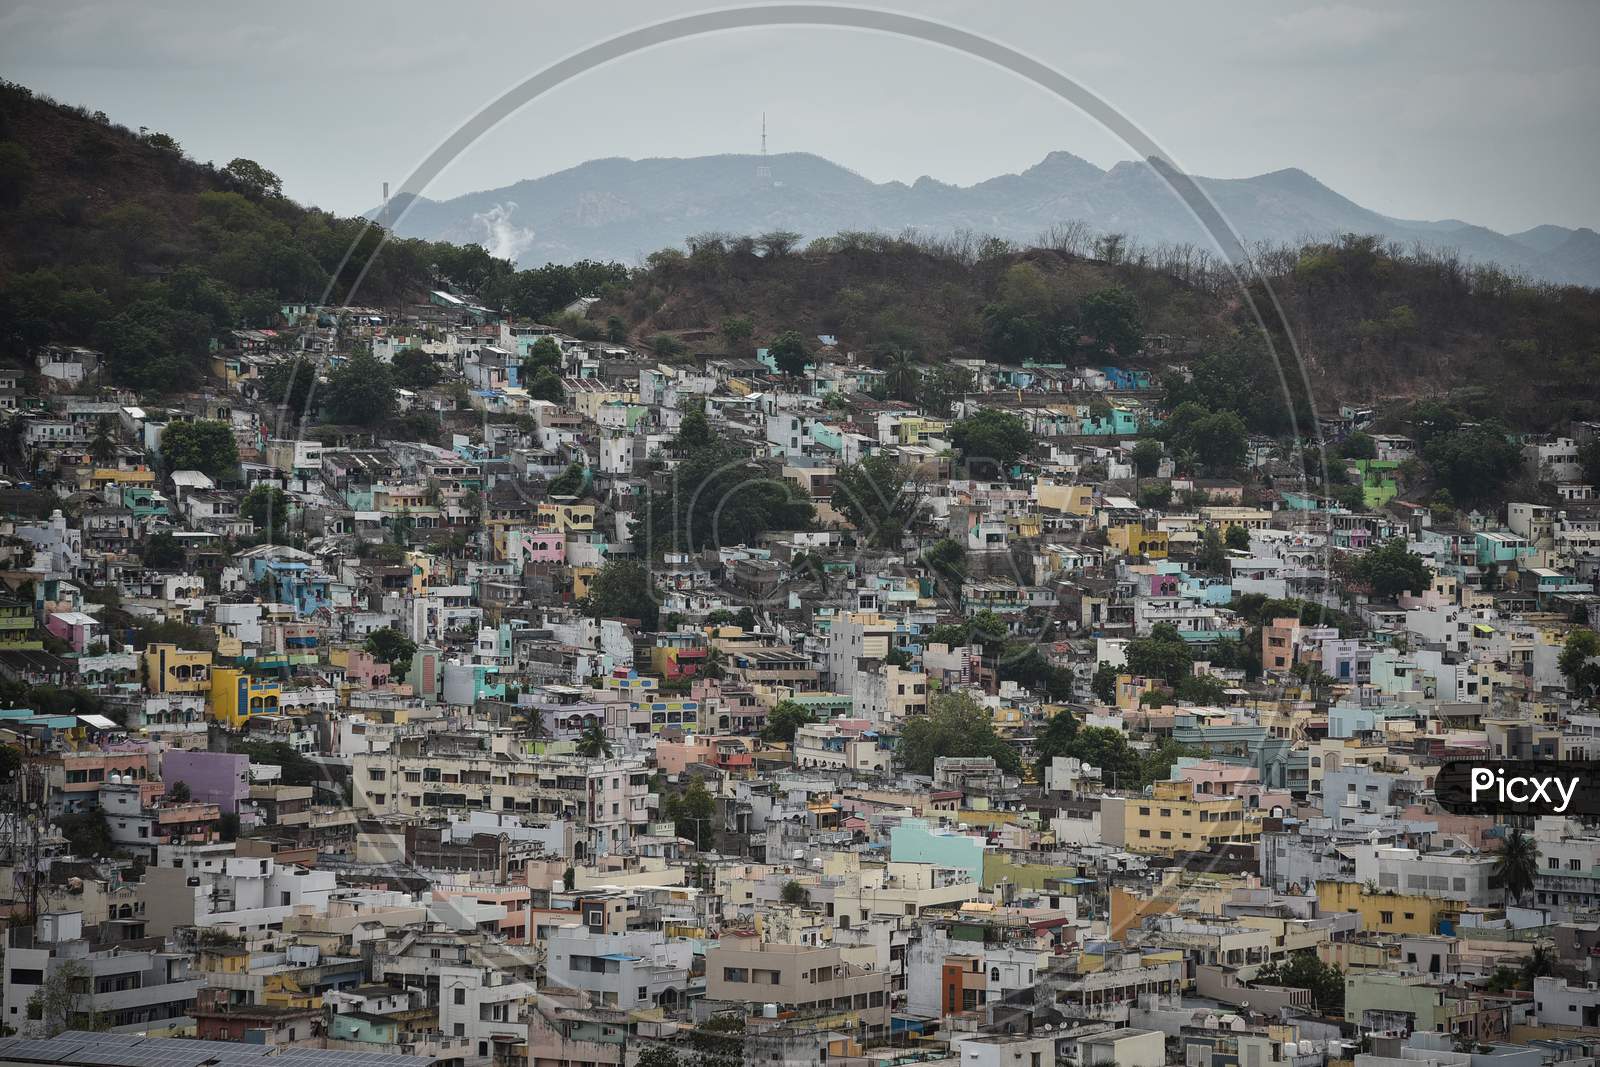 A view of the hilltop houses, during the fifth phase of coronavirus lockdown in Vijayawada.